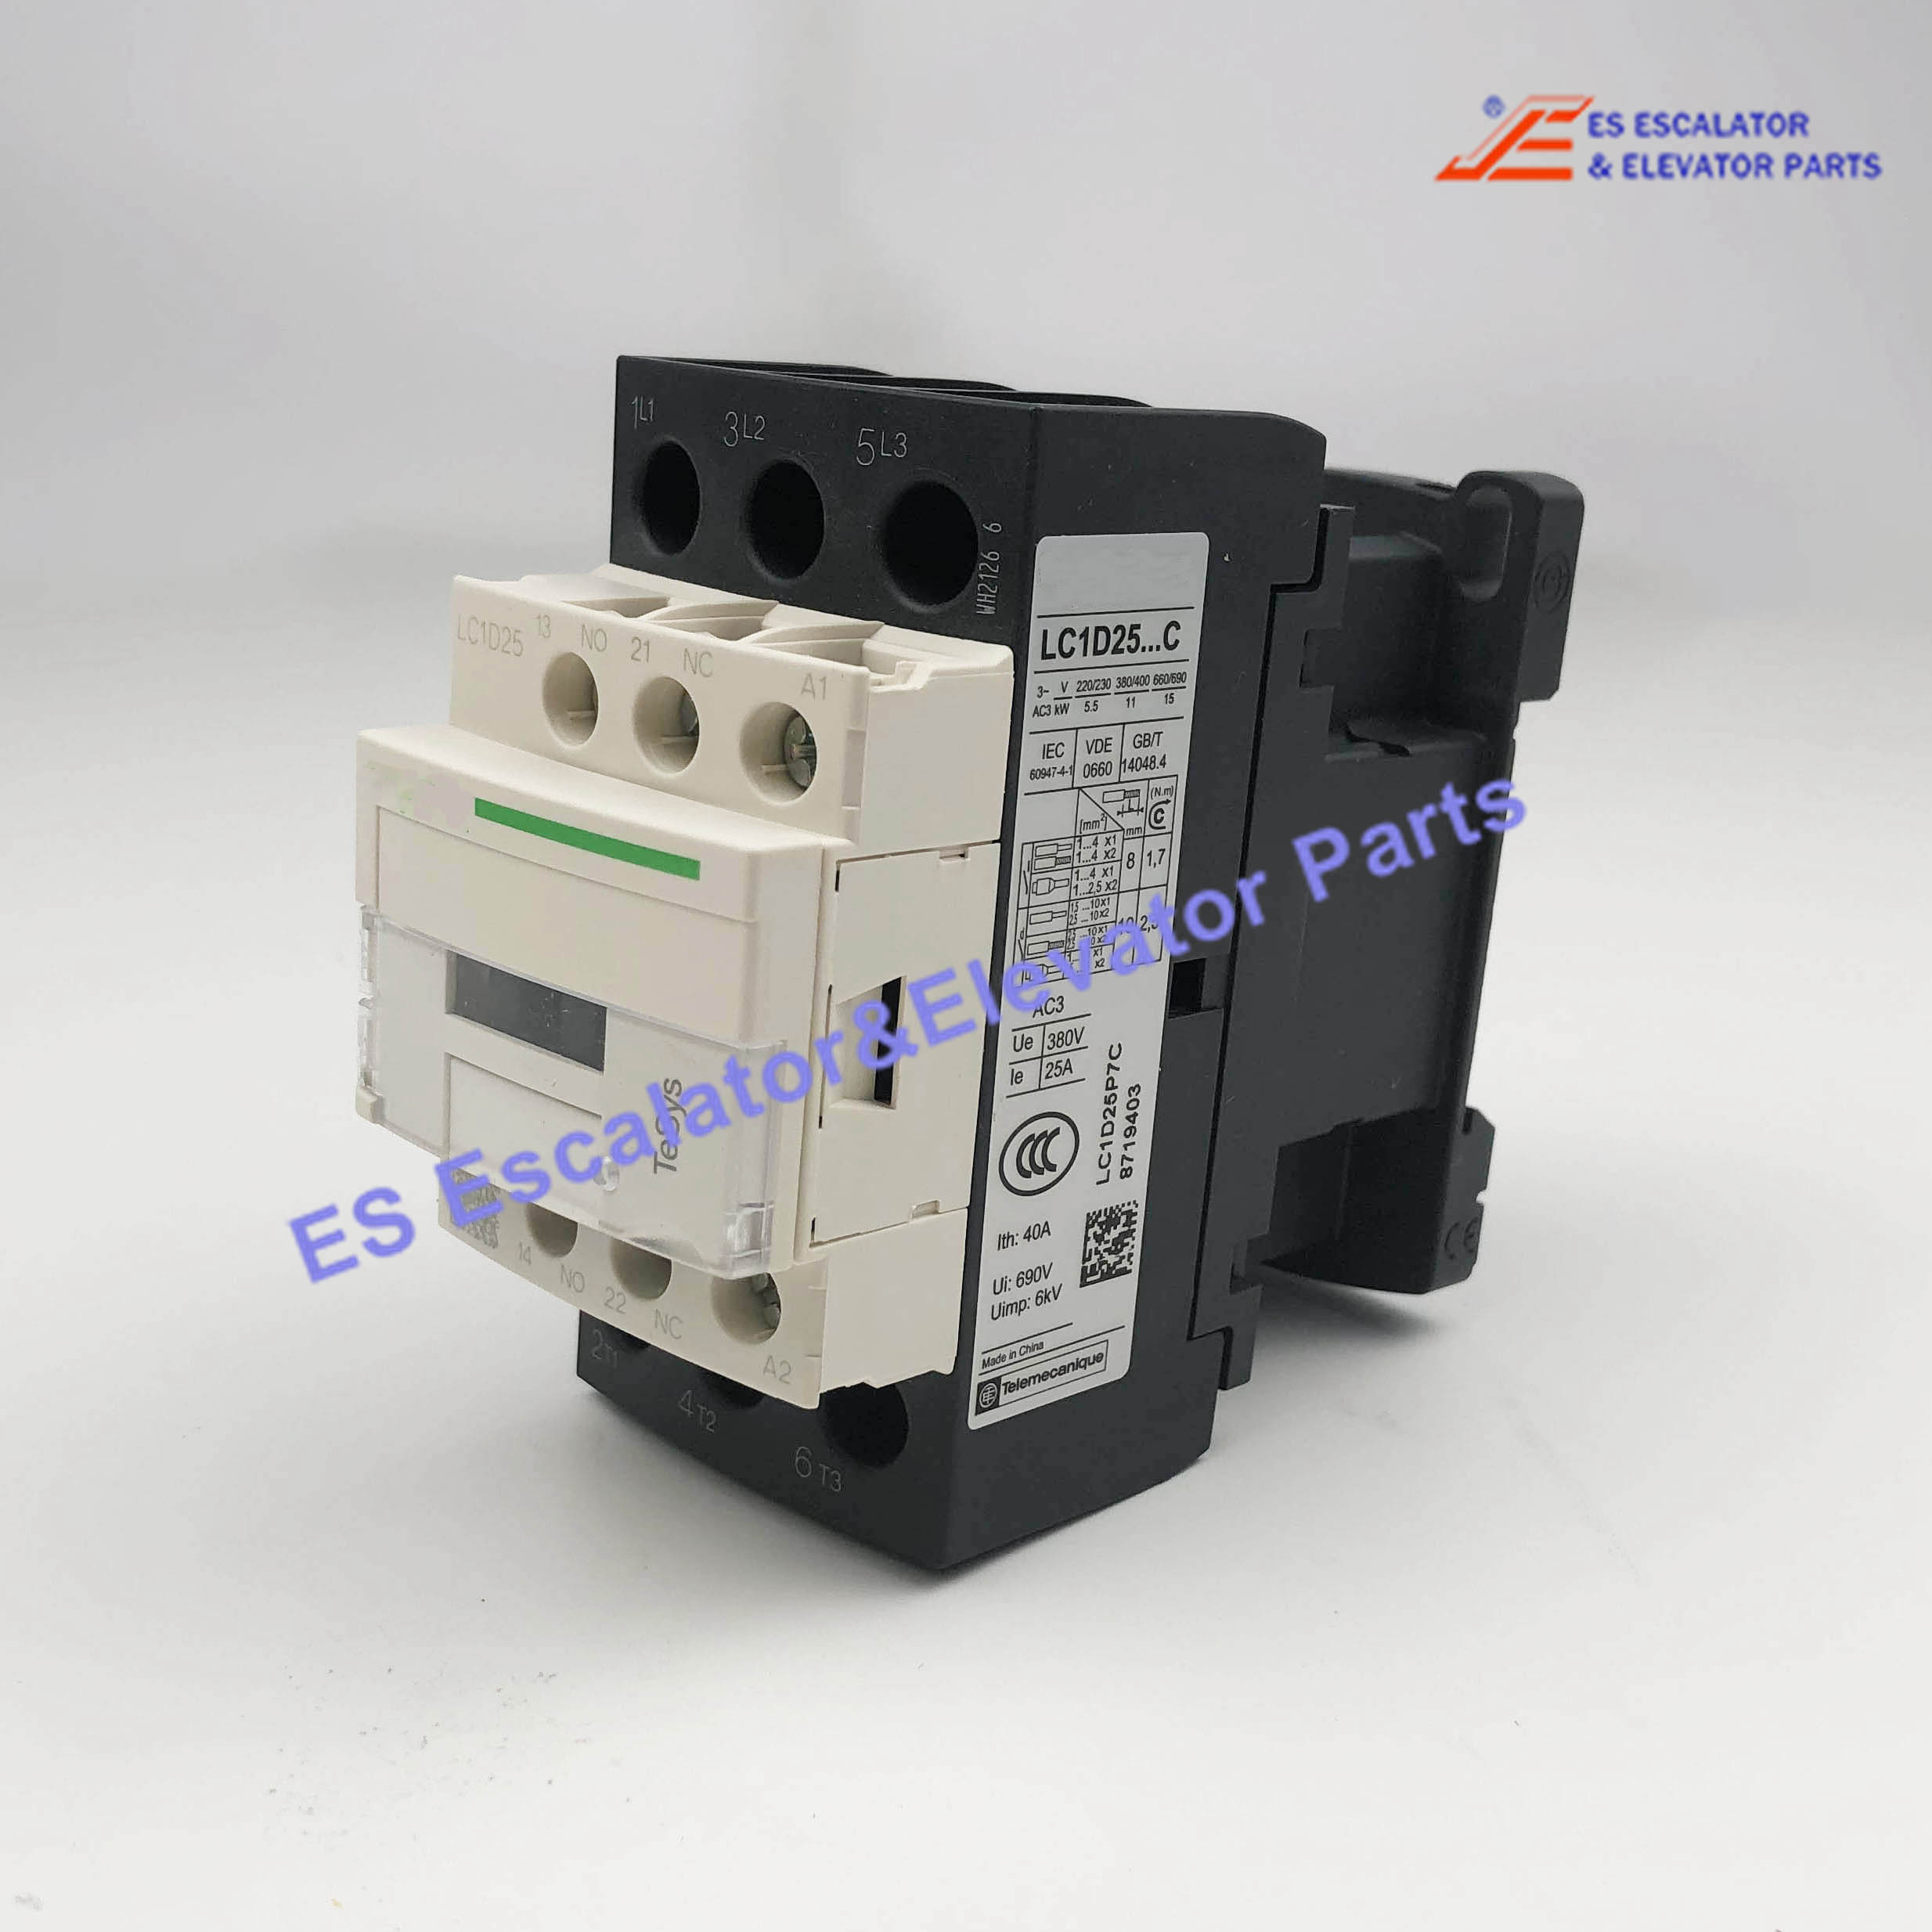 LC1D25 Escalator Auxiliary Contact Block Electric Contactor 230V 50/60HZ Use For Schneider